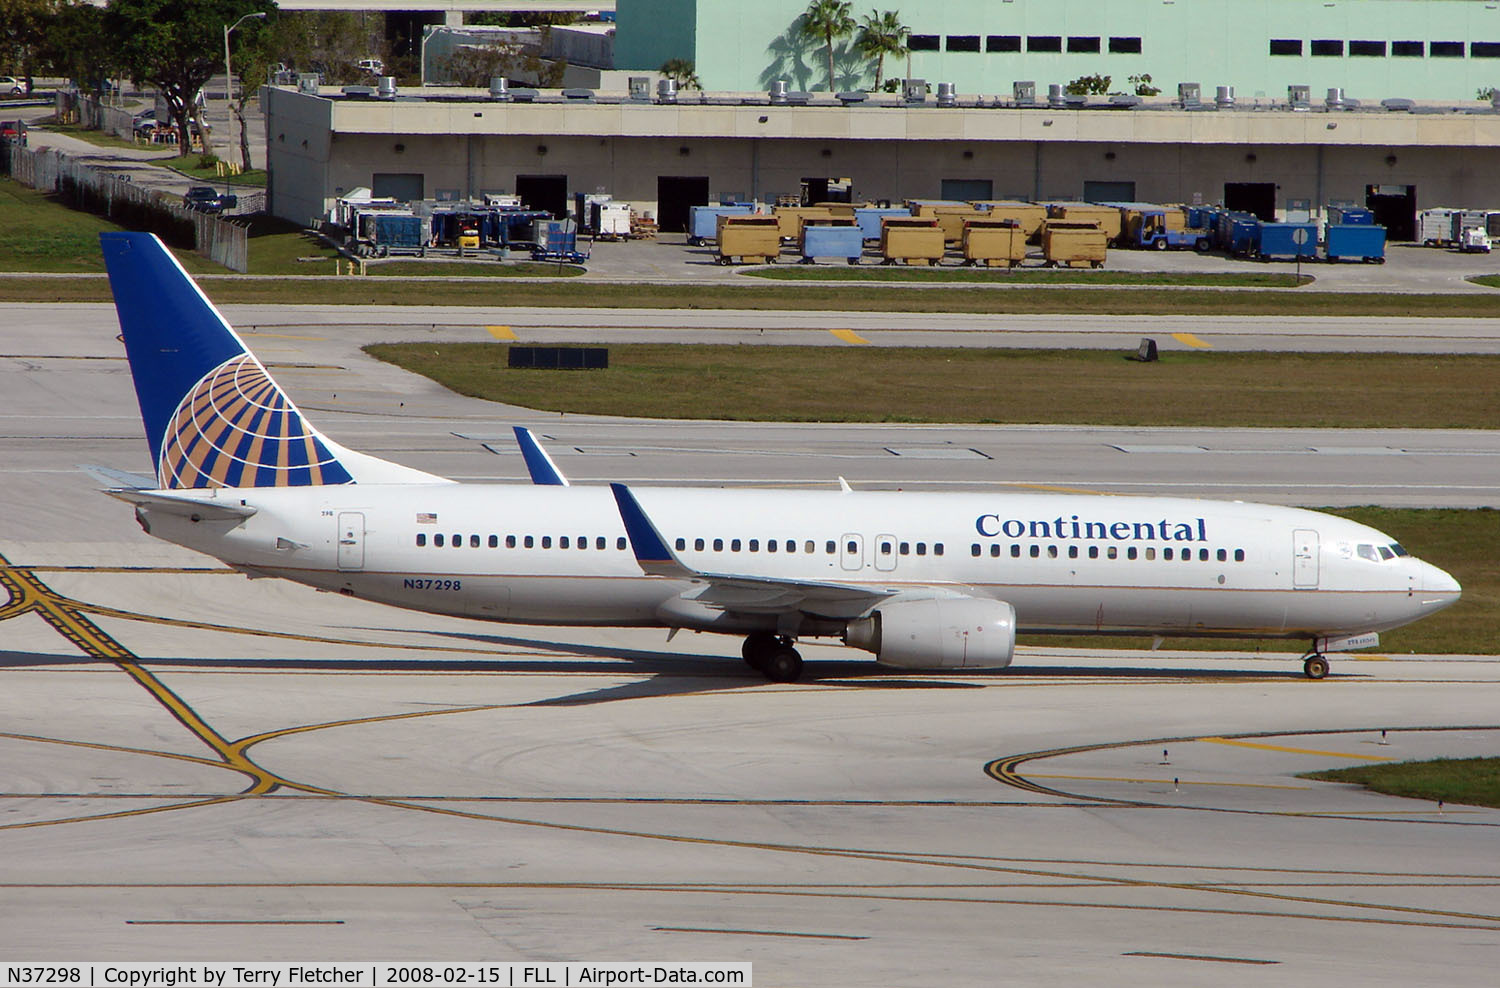 N37298, 2005 Boeing 737-824 C/N 34004, Continental Airlines B737 taxies in at FLL in Feb 2008